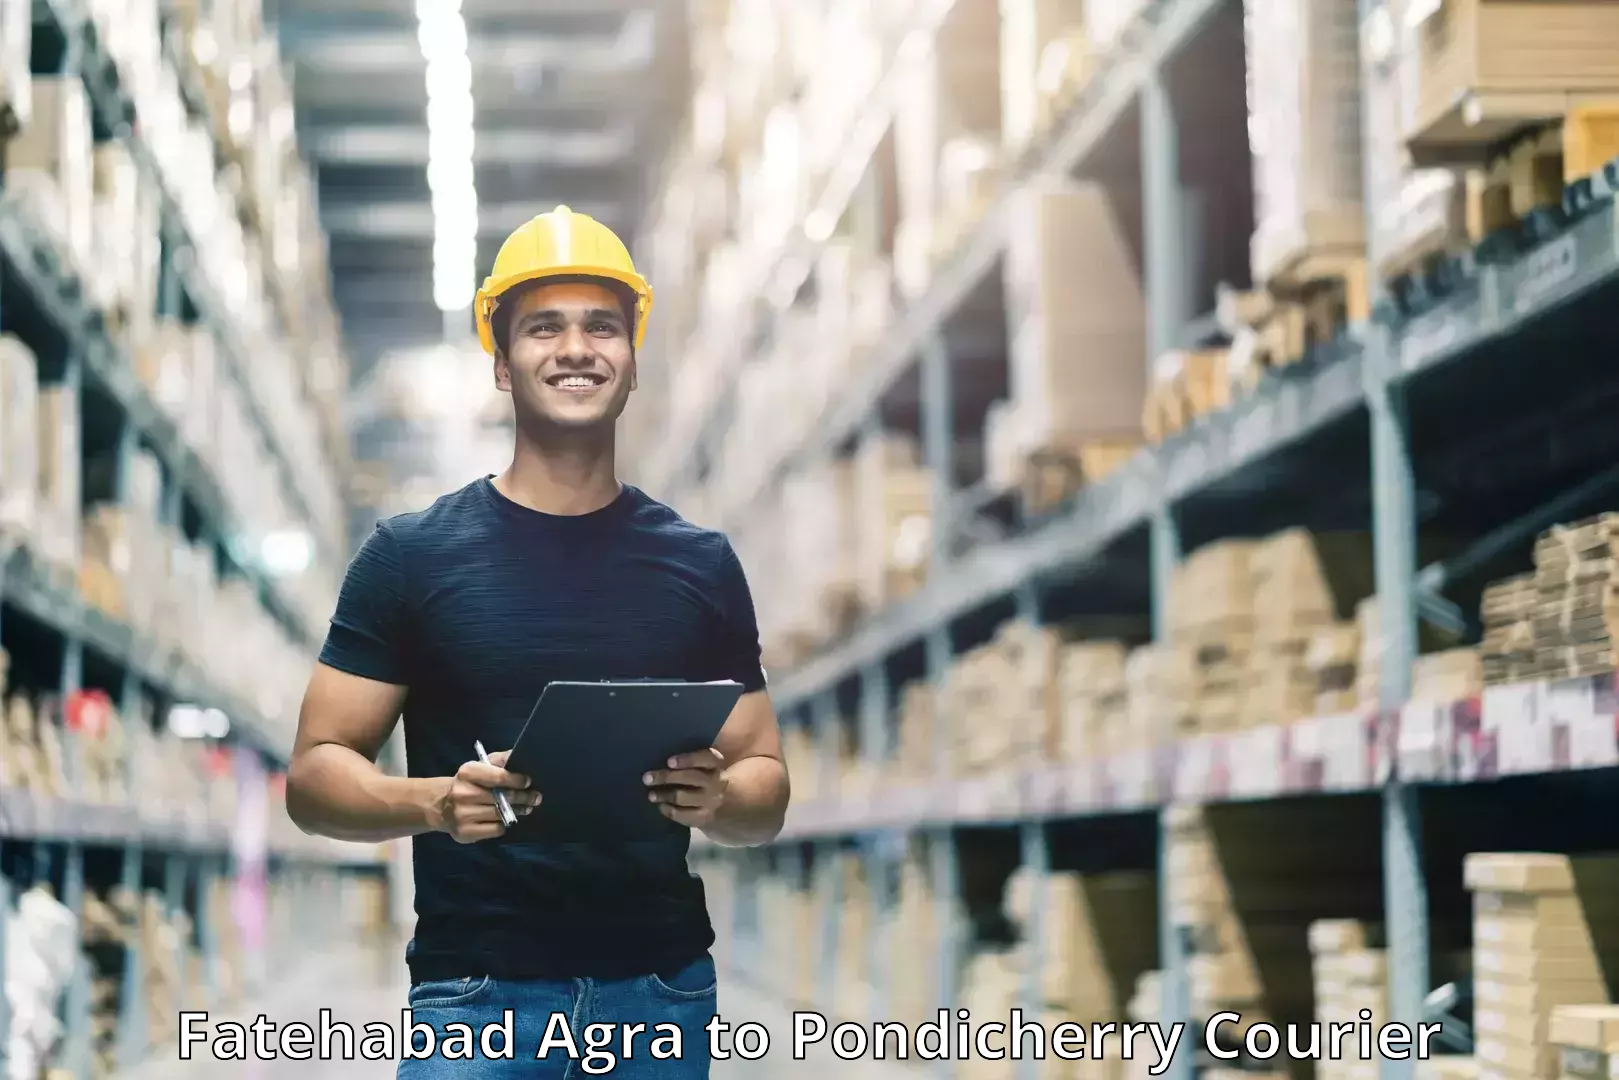 Courier service partnerships in Fatehabad Agra to Metttupalayam